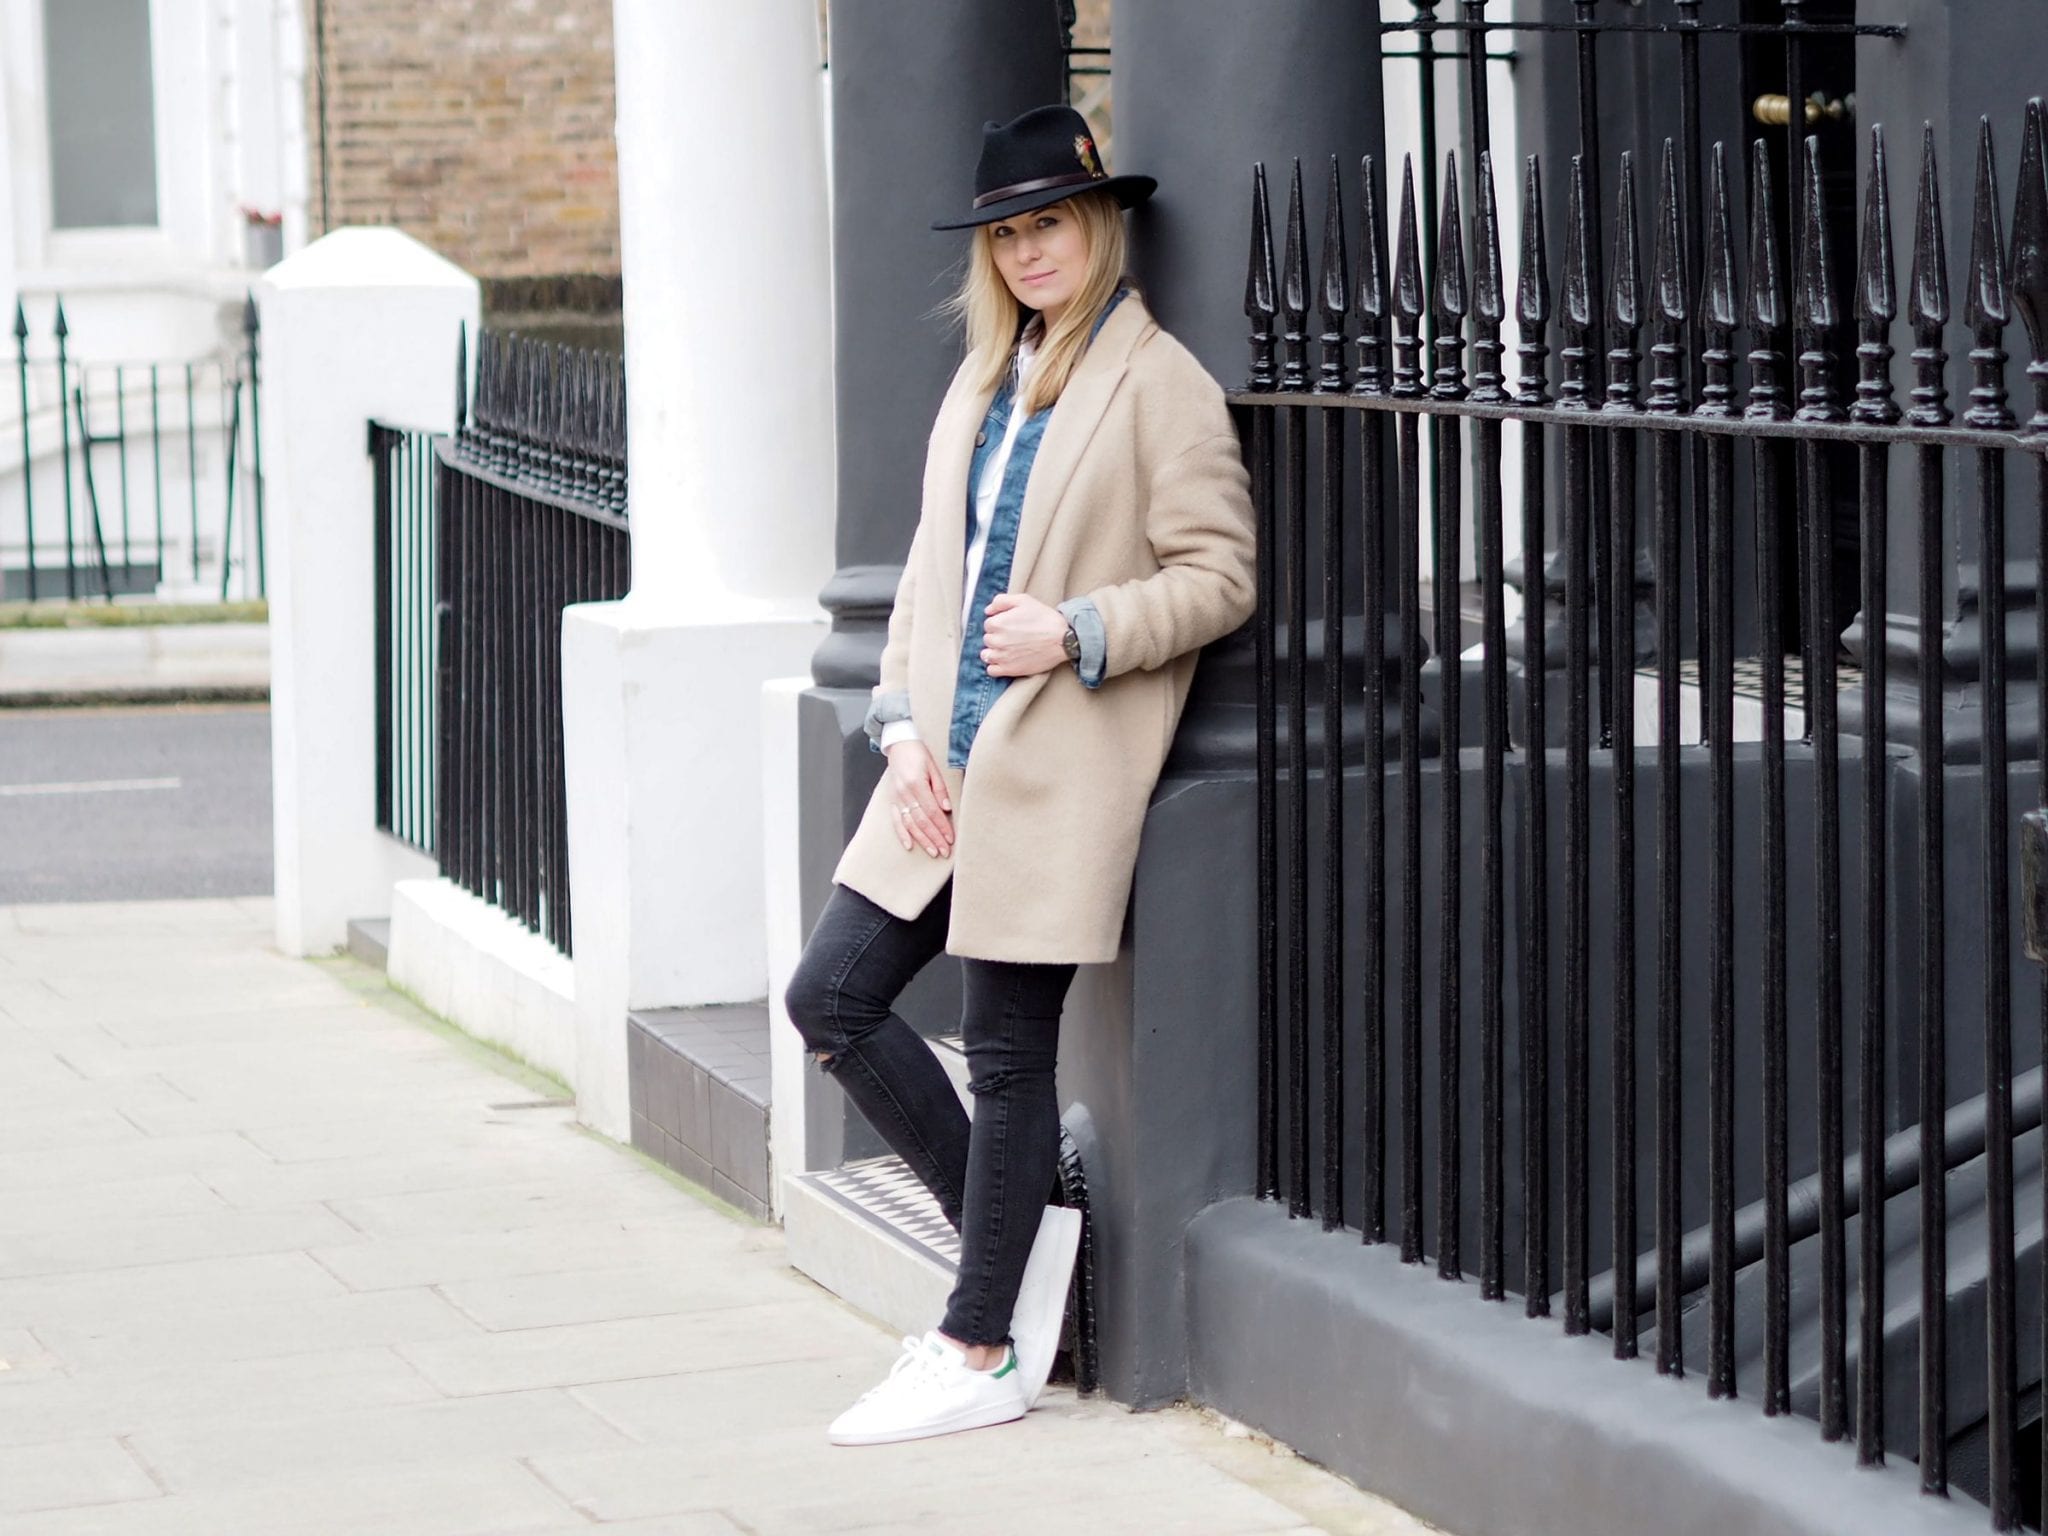 Style&Minimalism | It's Personal | Wearing Finders Keepers White Shirt, Wåven Denim Jacket, Camel Coat, Black Skinny Jeans, Black Fedora & Stan Smith Trainers